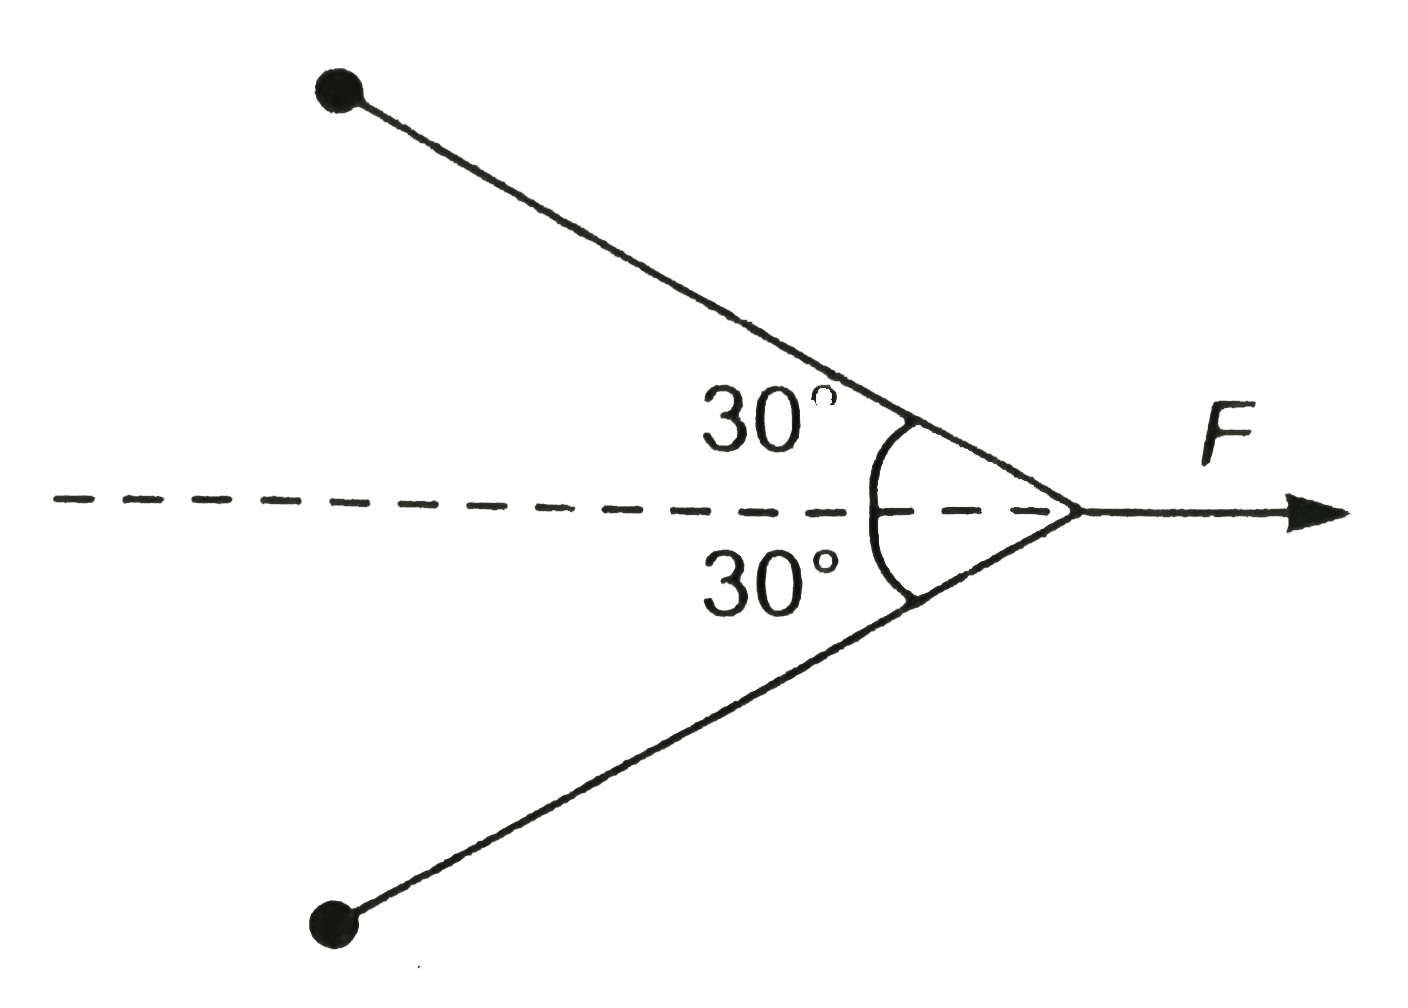 In figure two identical particles each of mass m are tied together with an inextensible string. This is pulled at its centre with a constant force F. If the whole system lines on a smooth horizontal plane, then the acceleration of each particle towards each other is